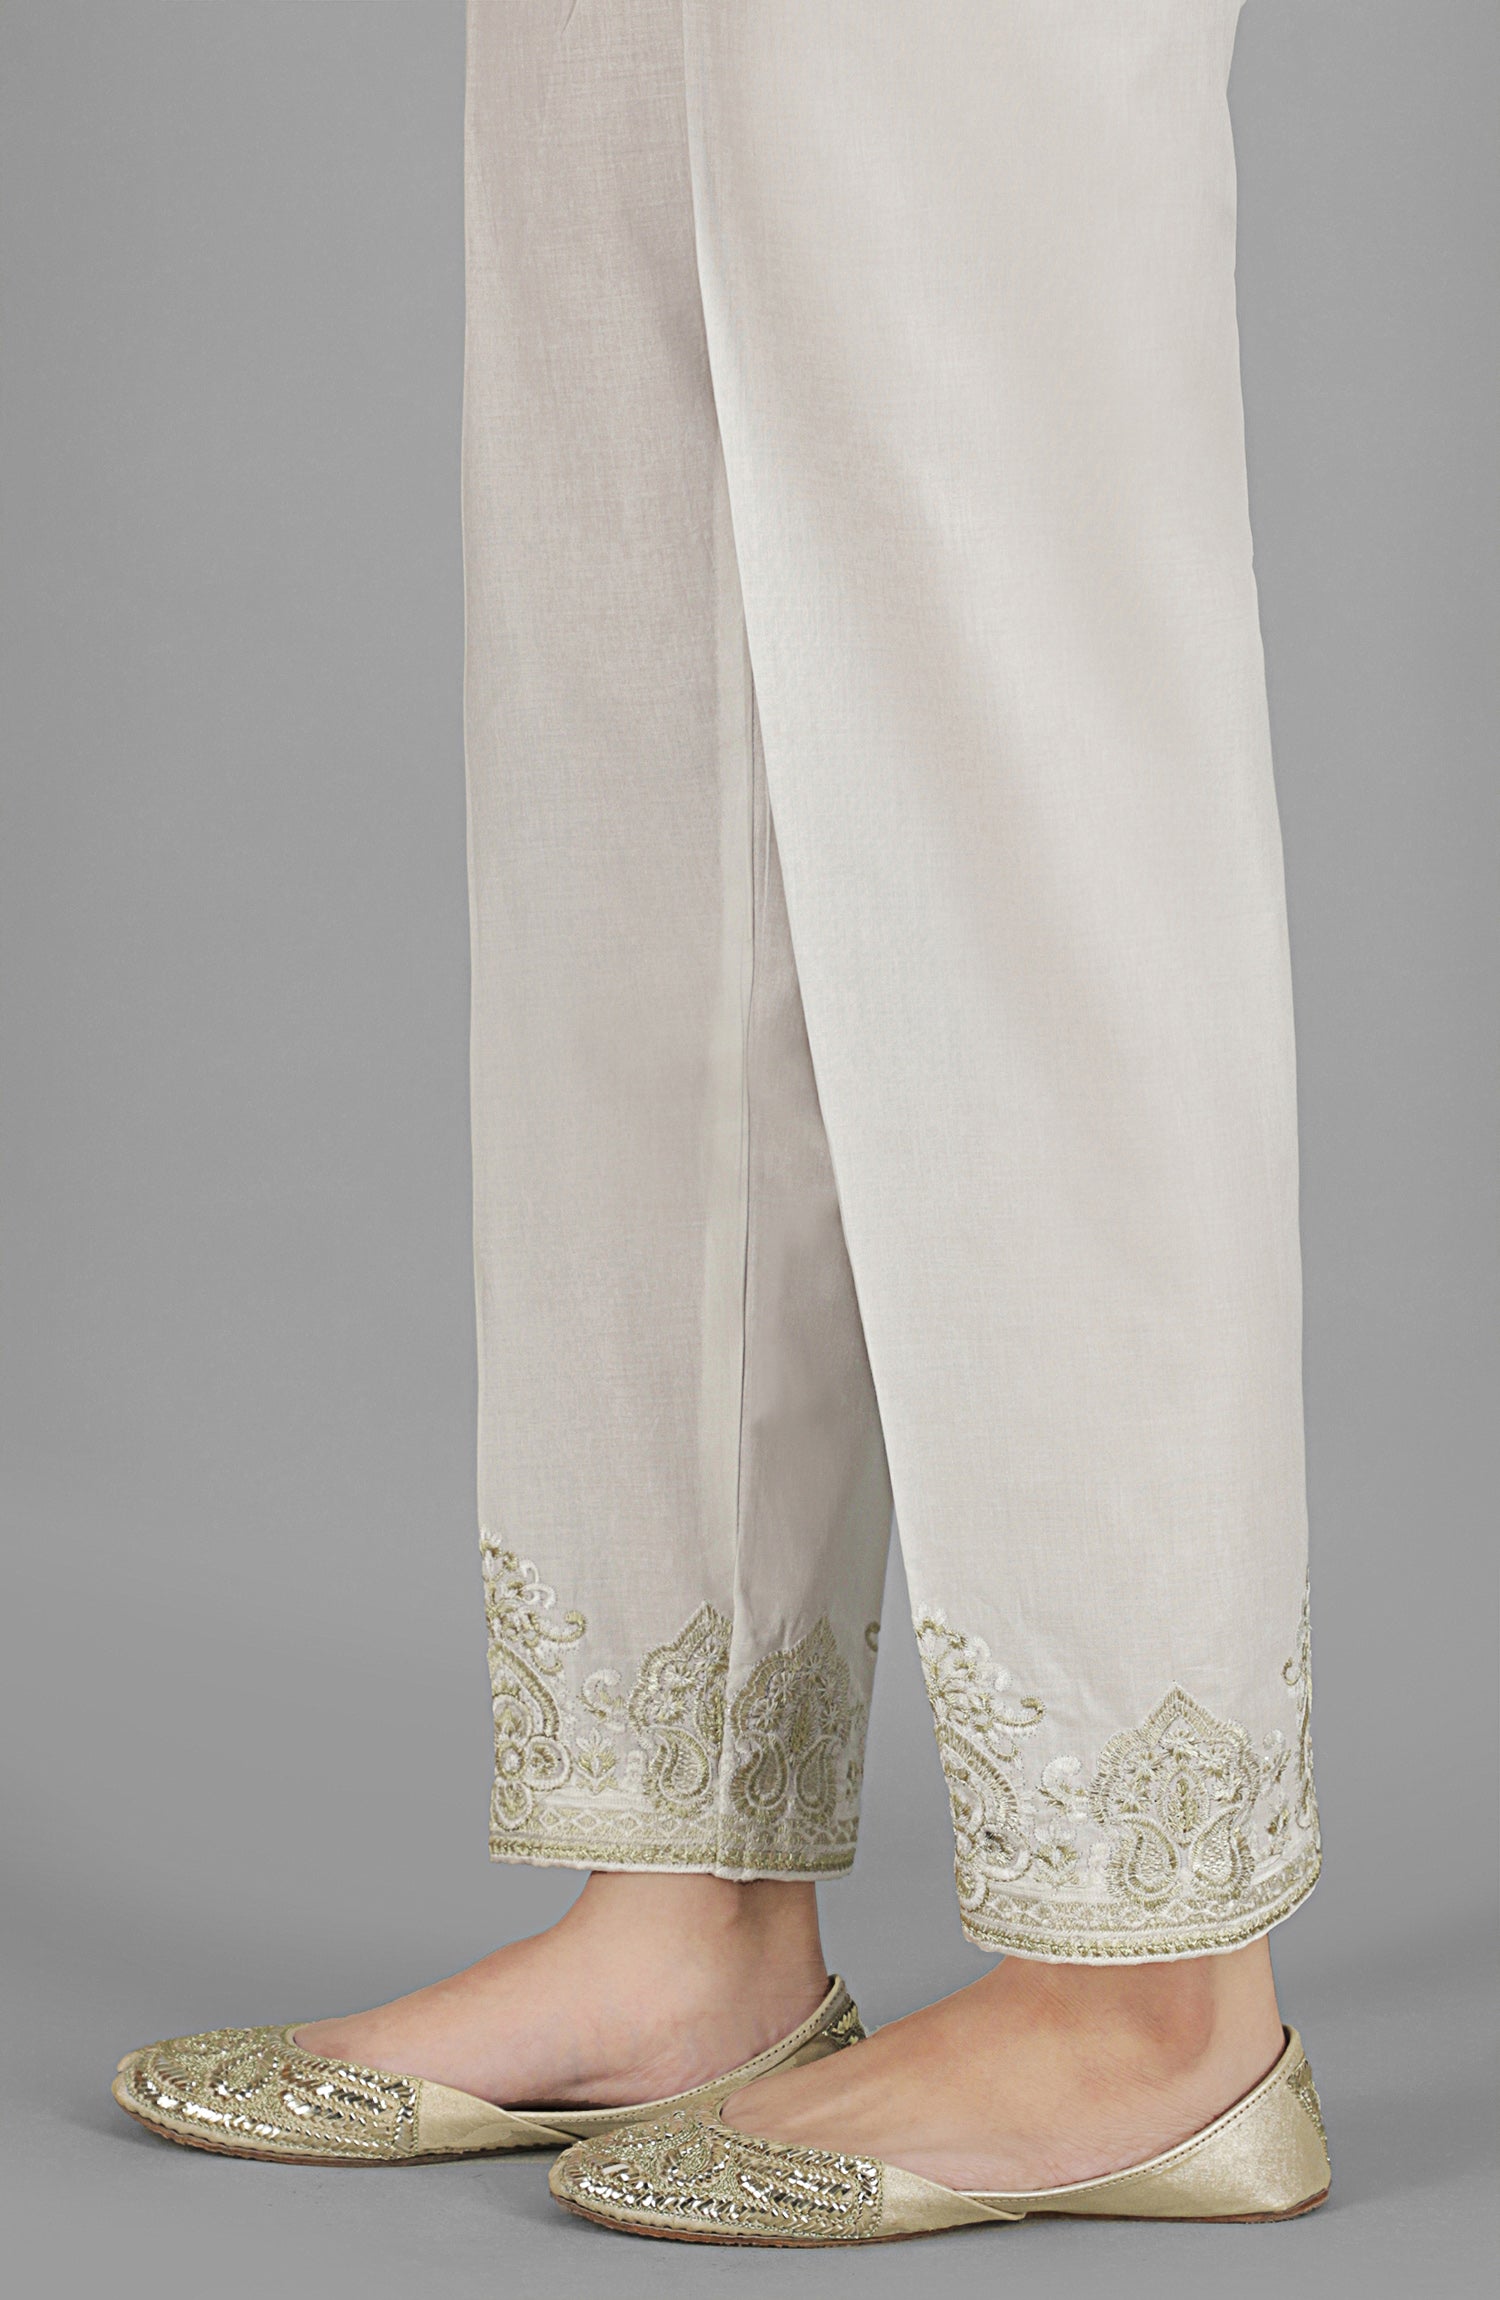 NRPE-055/S WHITE CAMBRIC SCPANTS STITCHED BOTTOMS PANTS